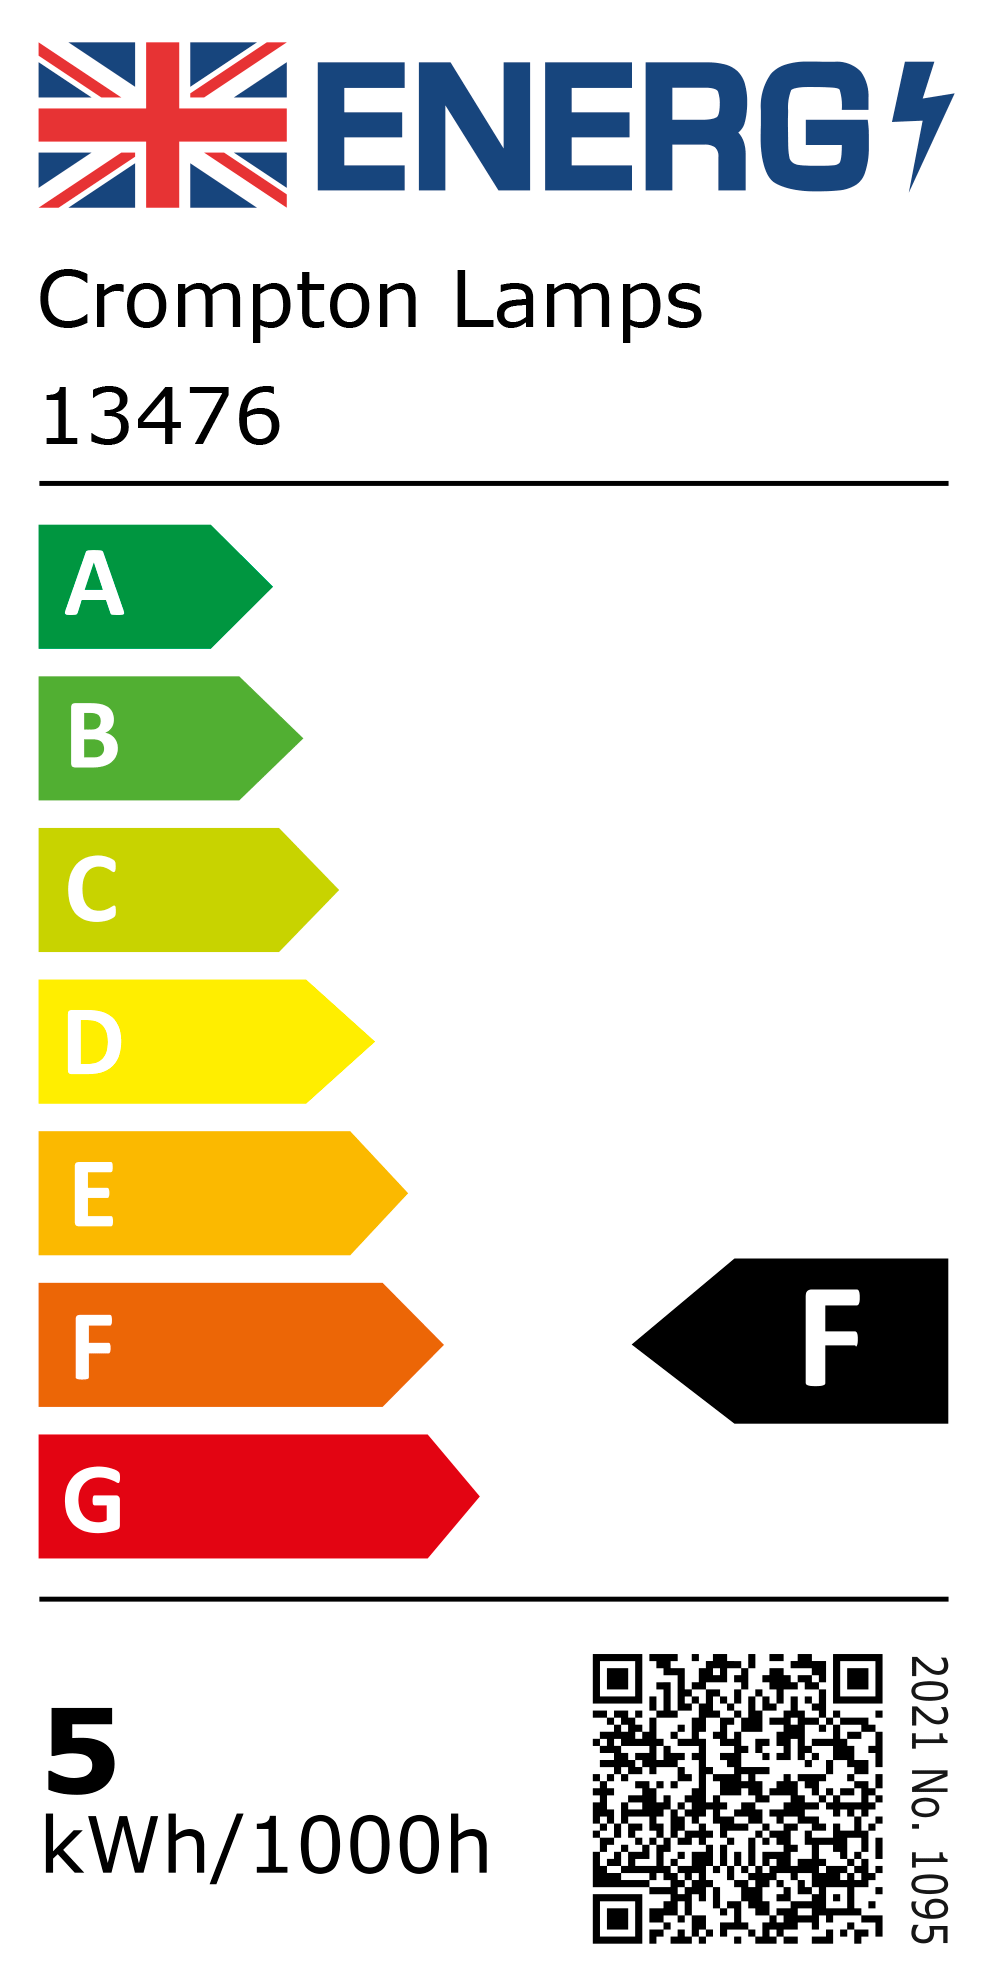 New 2021 Energy Rating Label: Stock Code 13476